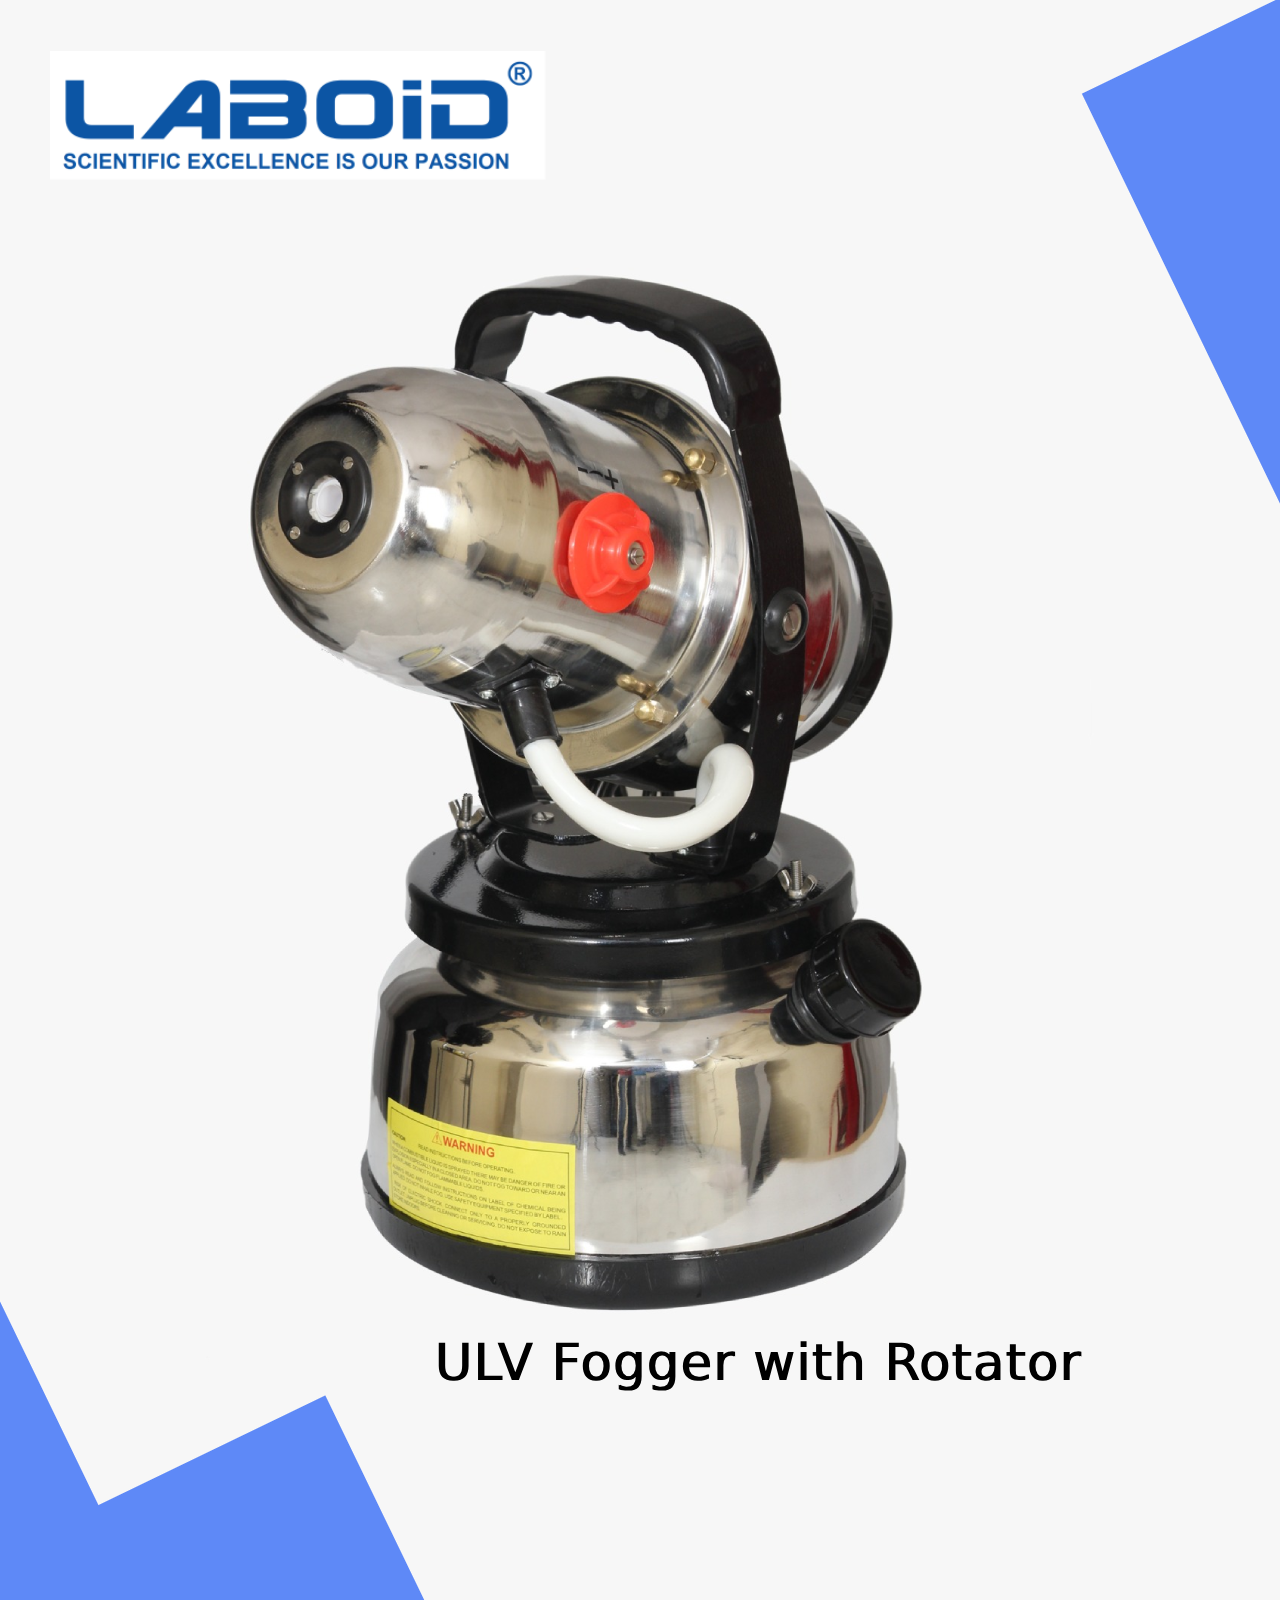 ULV Fogger with Rotator In New Zealand